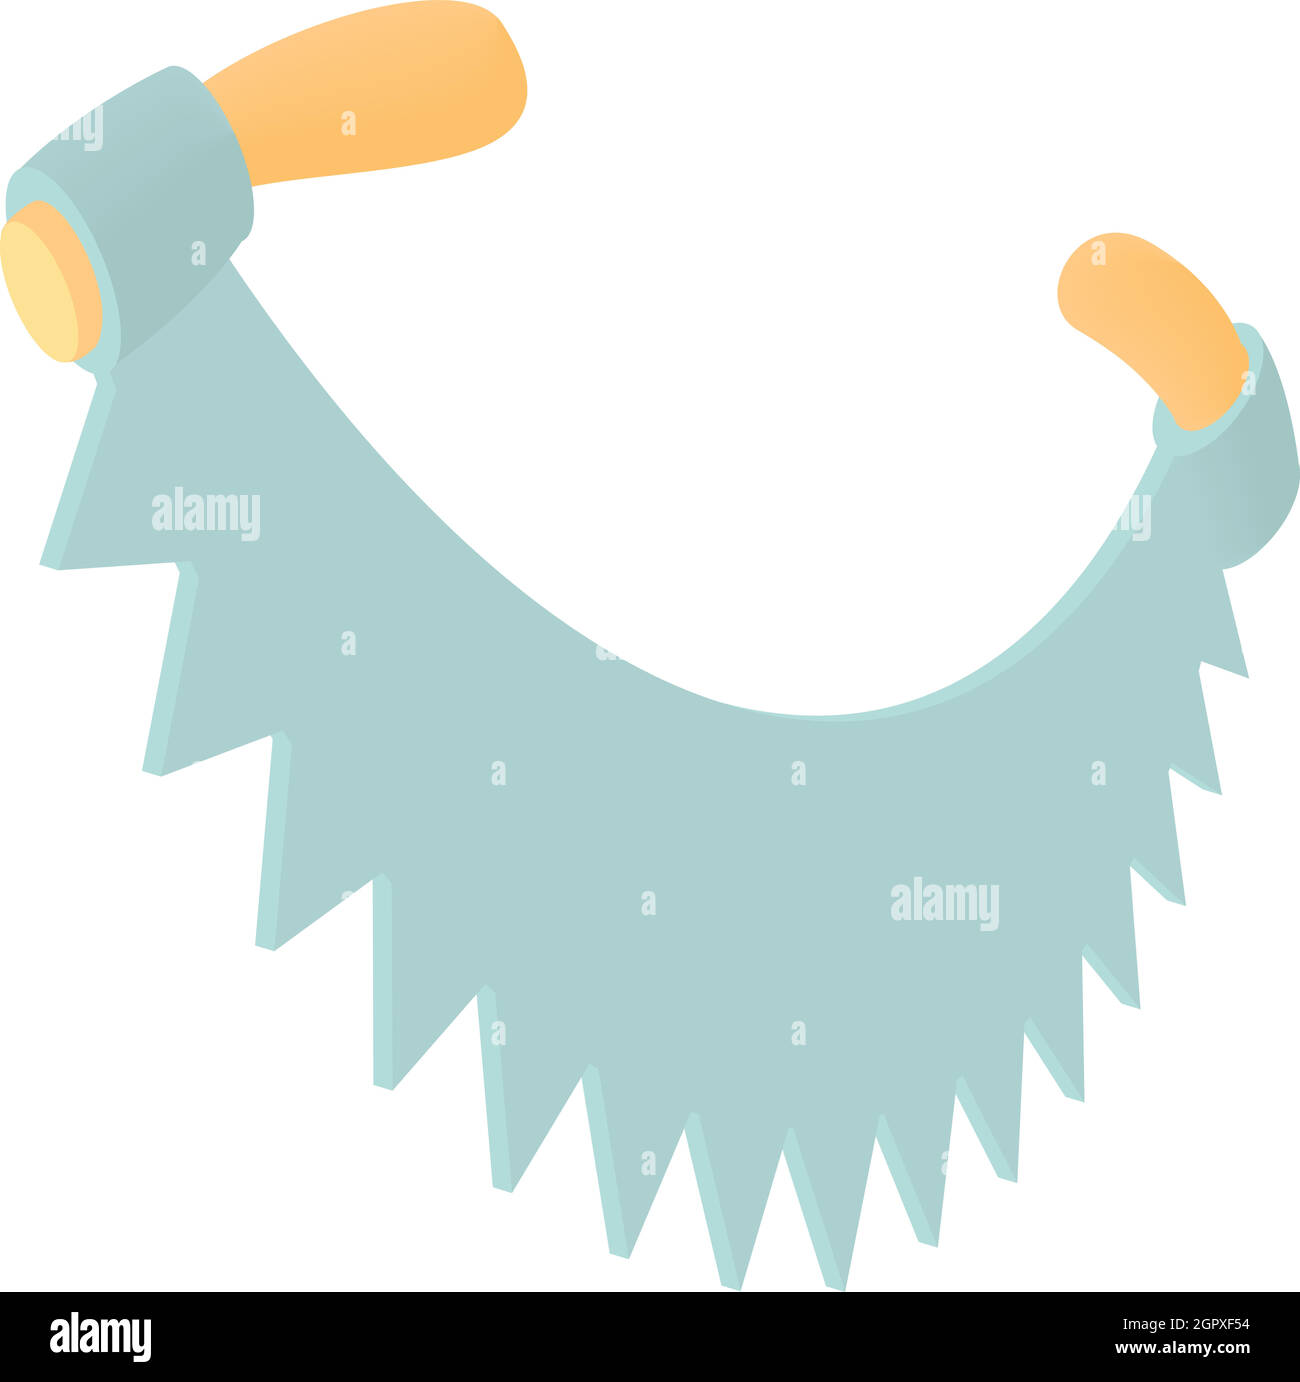 Two handled saw icon in cartoon style Stock Vector